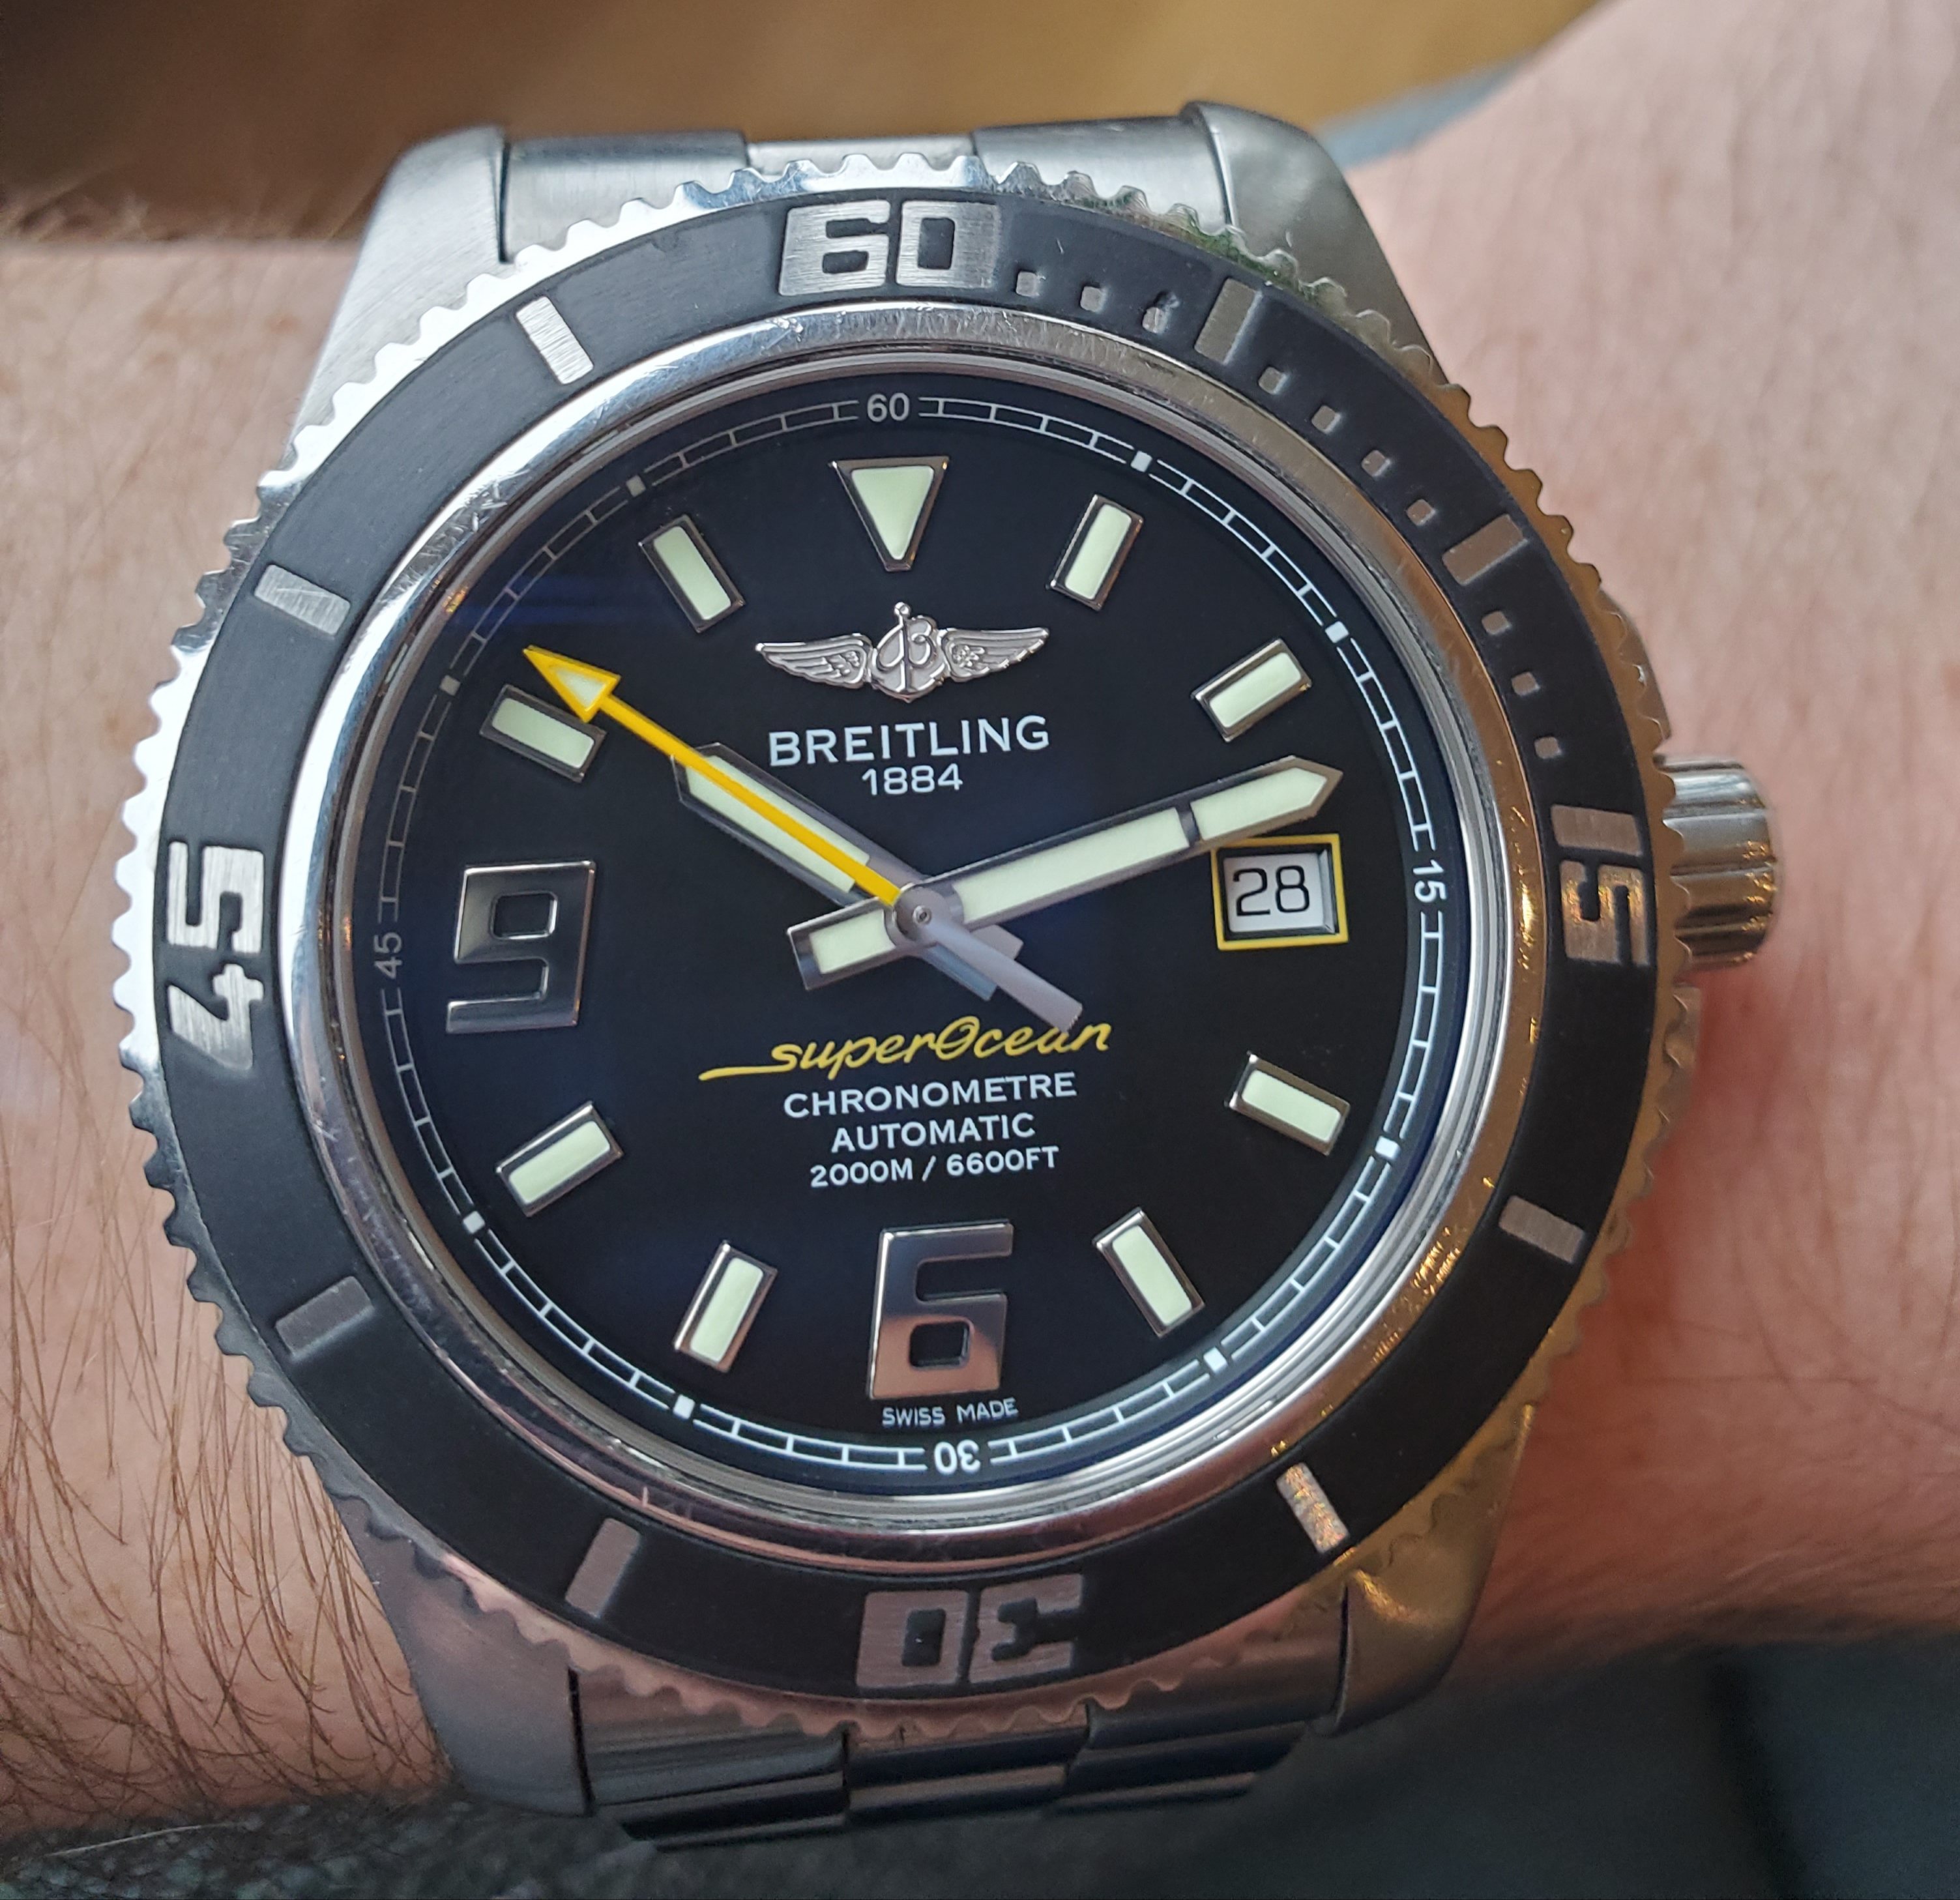 Omega Seamaster vs Breitling Super Ocean - Page 1 - Watches - PistonHeads